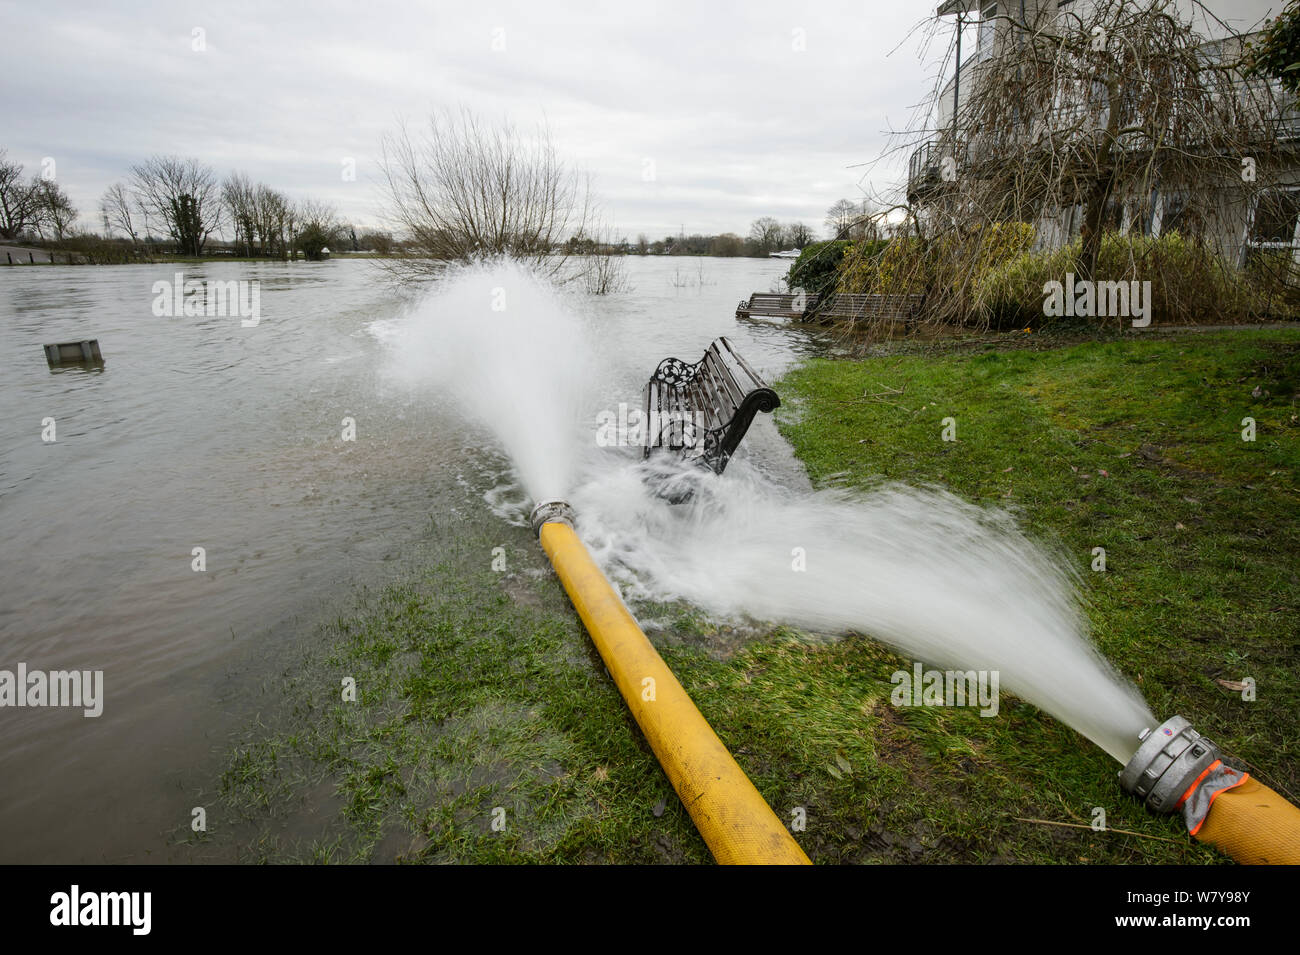 Hoses used to pump floodwater from River Thames away from houses, Chertsey, Surrey, UK, February 2014. Stock Photo